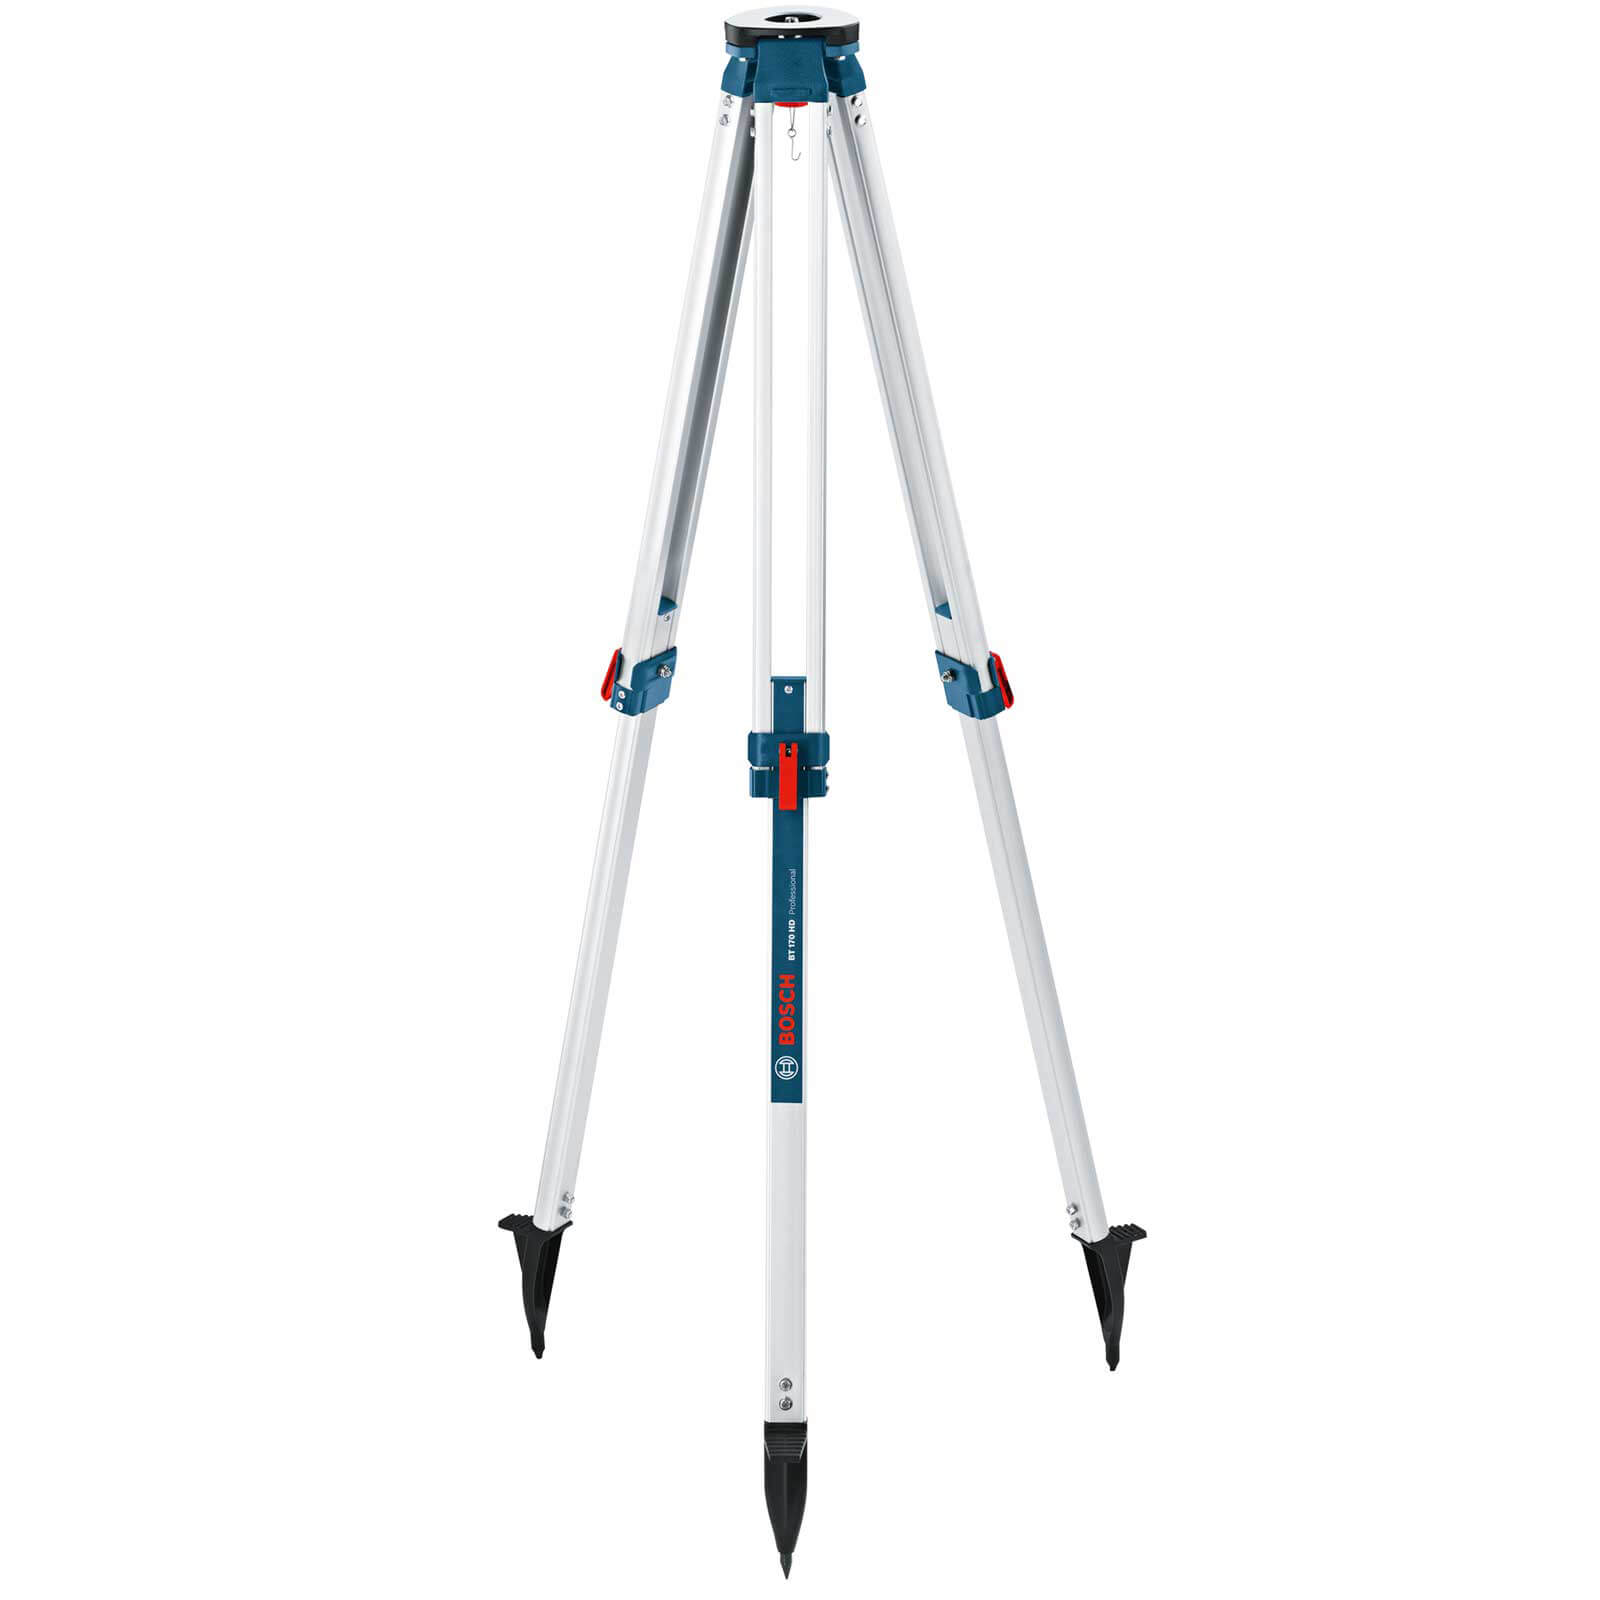 Image of Bosch BT 170 HD Professional Tripod for Laser Levels